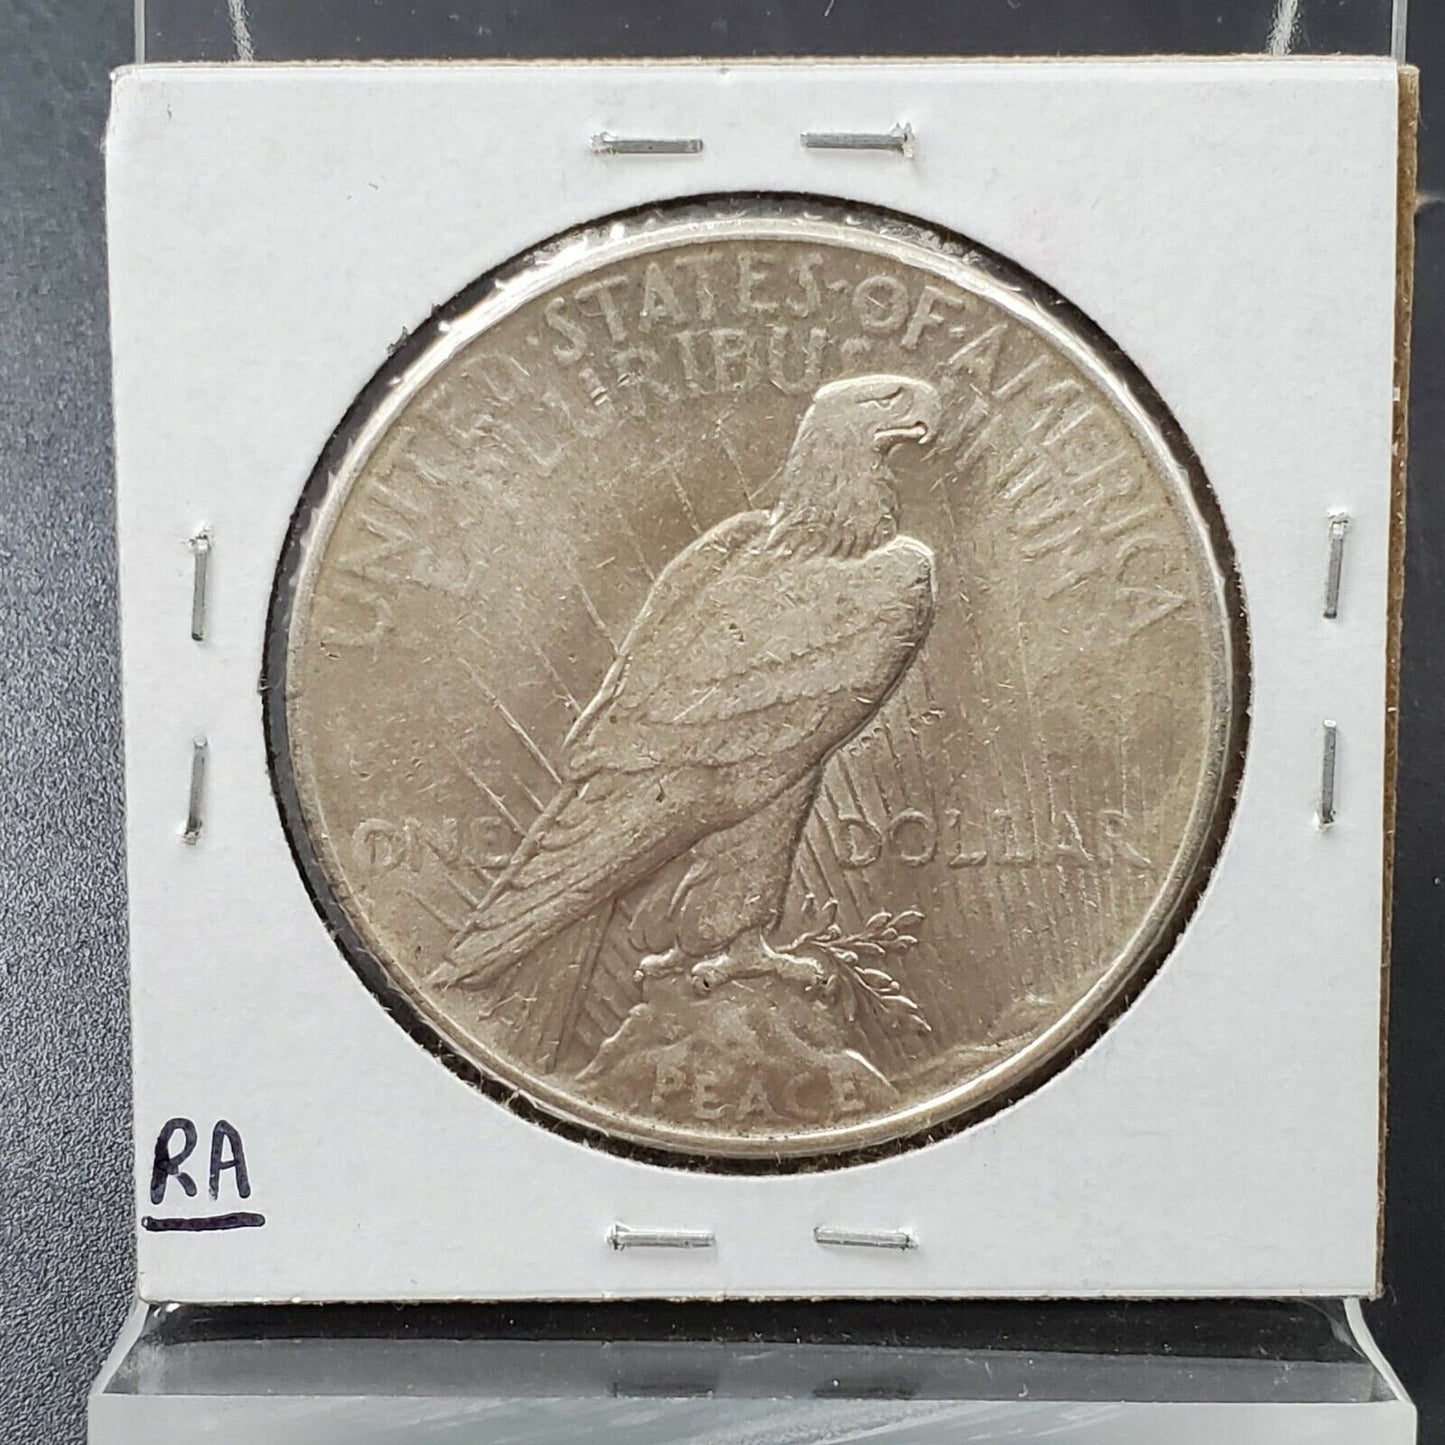 1935 P Peace 90% Silver Eagle Dollar Coin Circulated XF / AU Details Shiny